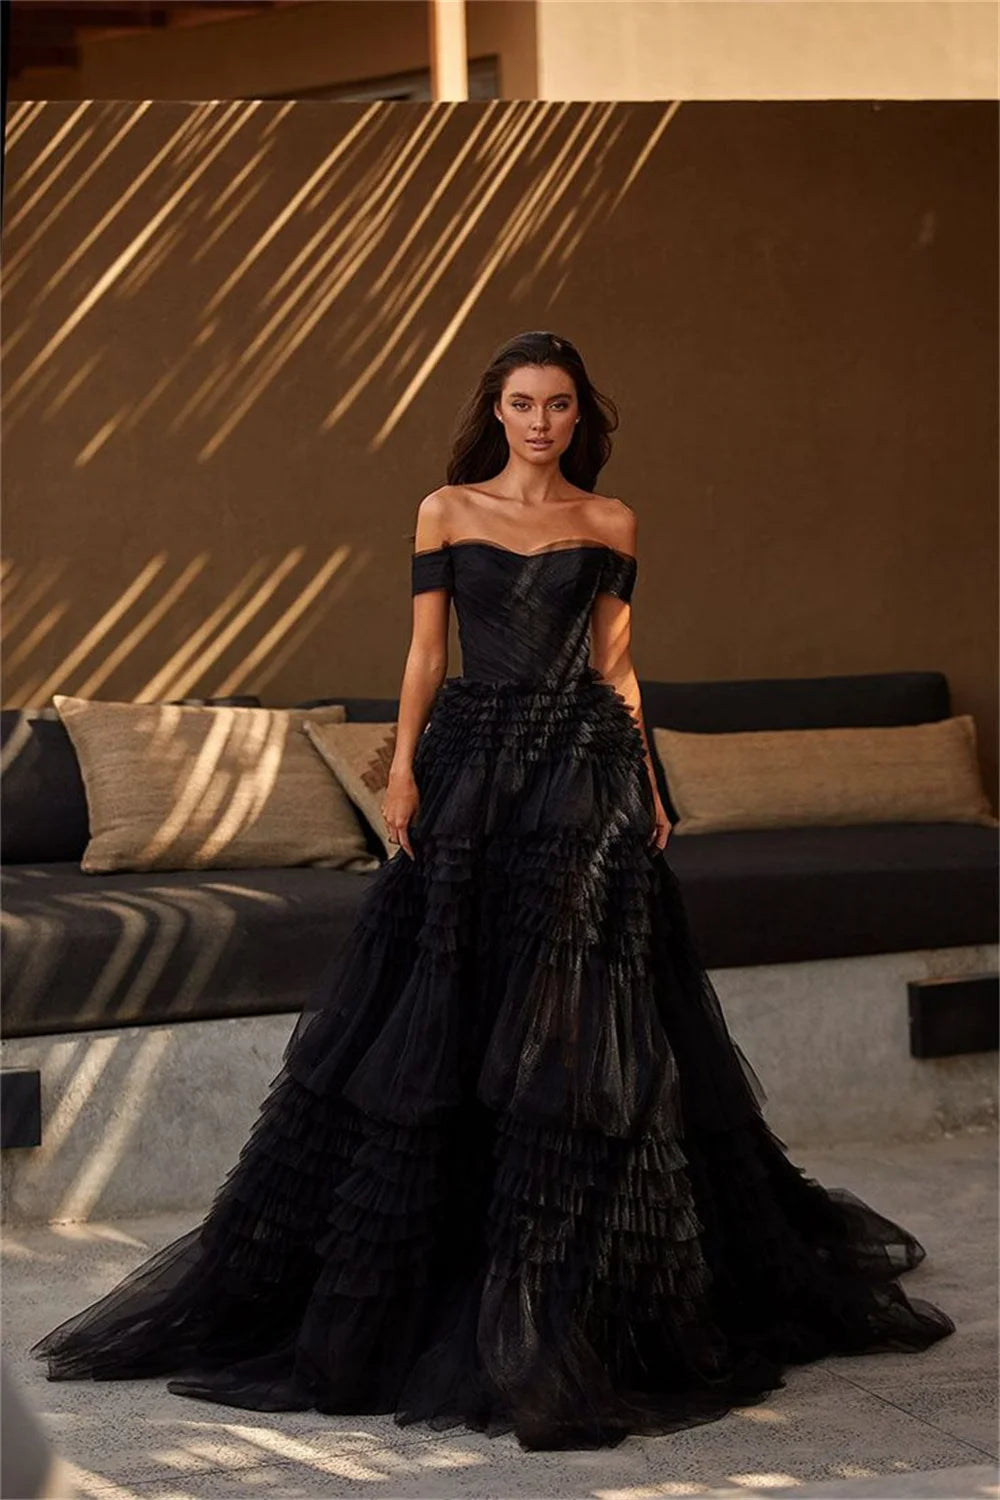 UU-Sexy Off Shoulder Prom Dress Black Multilayer فستان حفلات الزفاف Luxury Ball Gown Tulle Puffy Robes